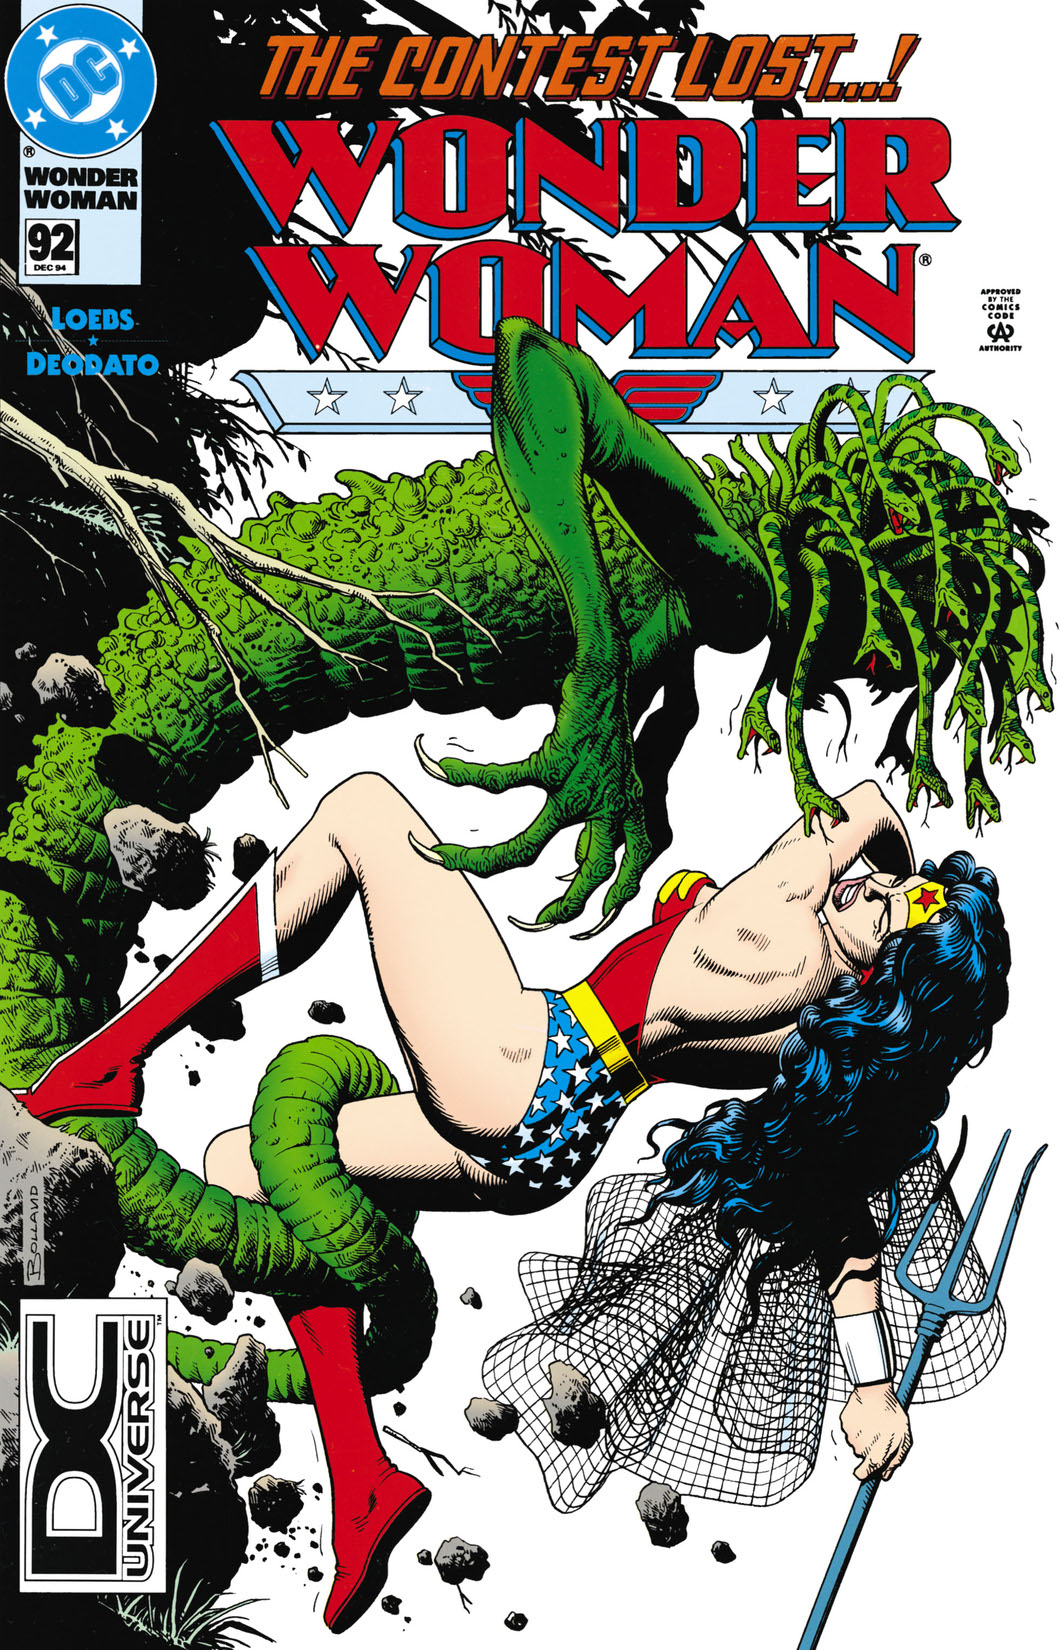 Wonder Woman (1986-) #92 preview images